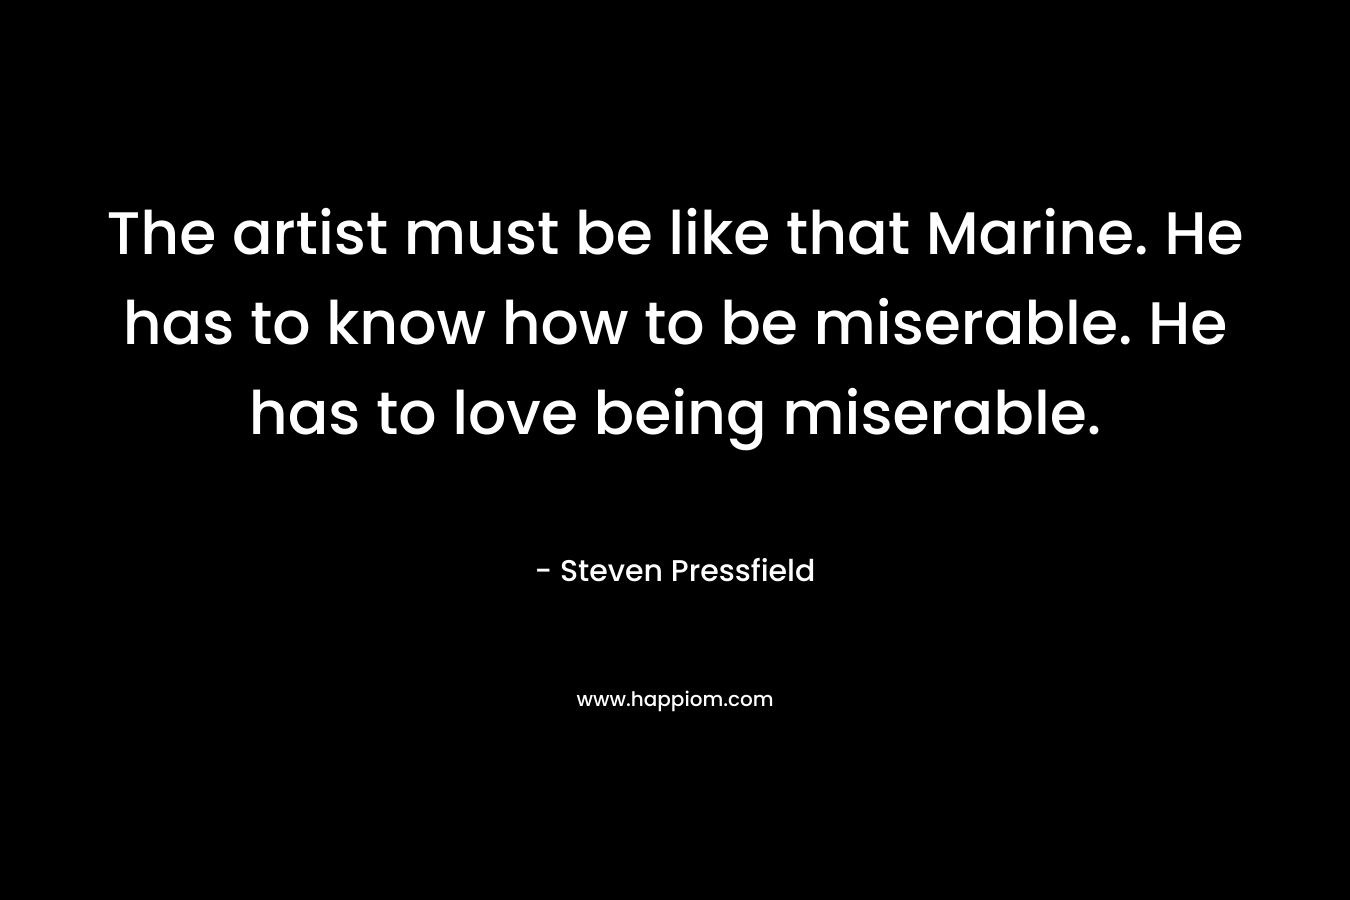 The artist must be like that Marine. He has to know how to be miserable. He has to love being miserable.